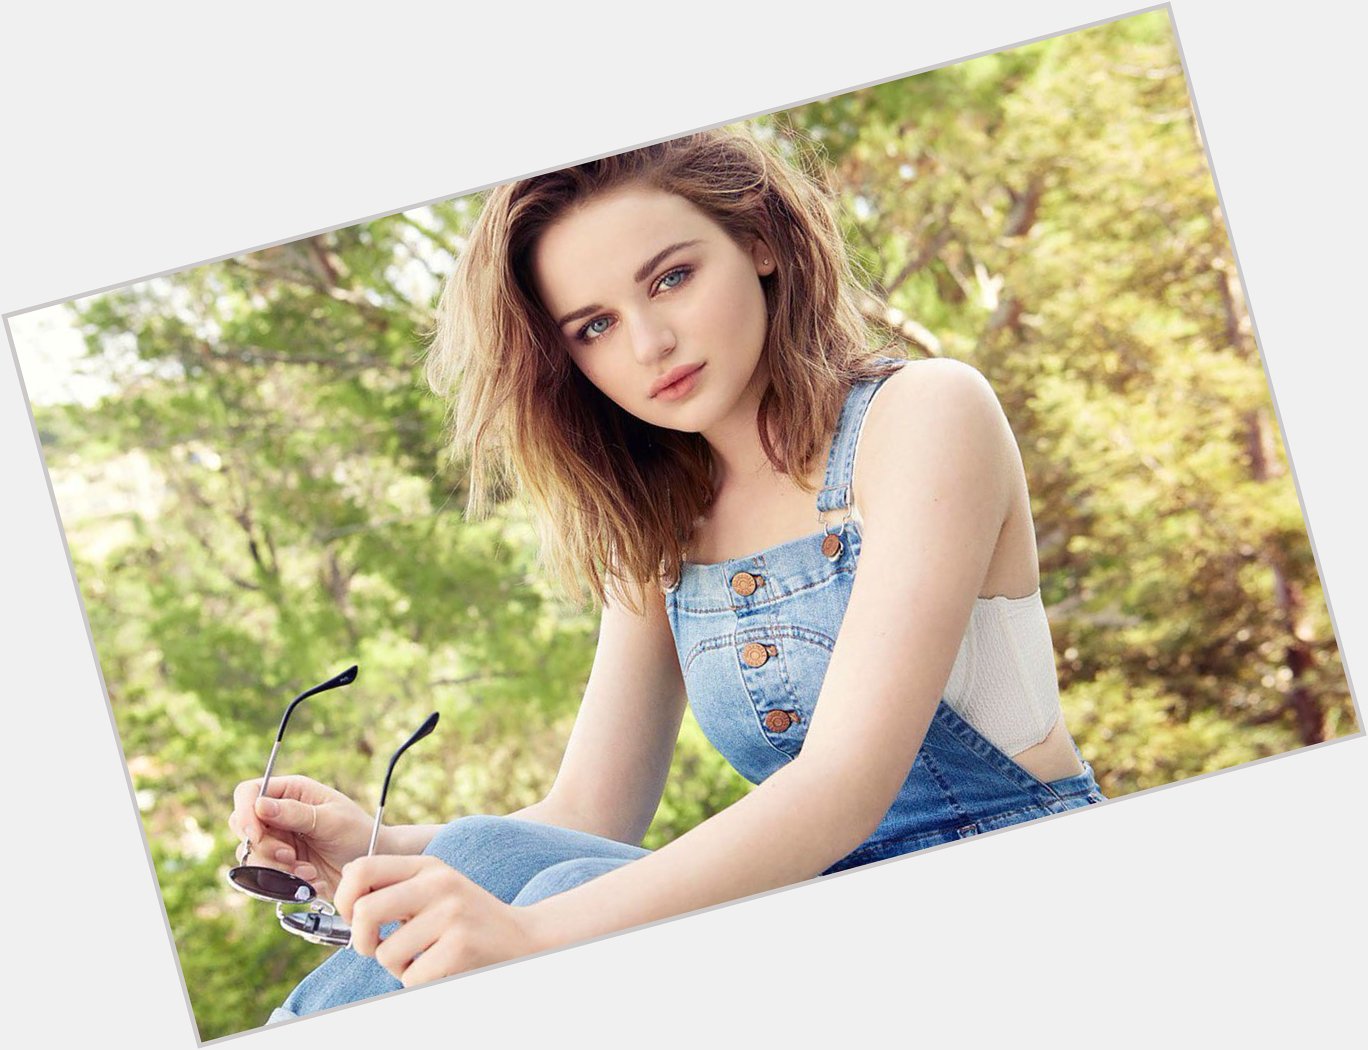 Happy Birthday to Joey king she turns 18 today   